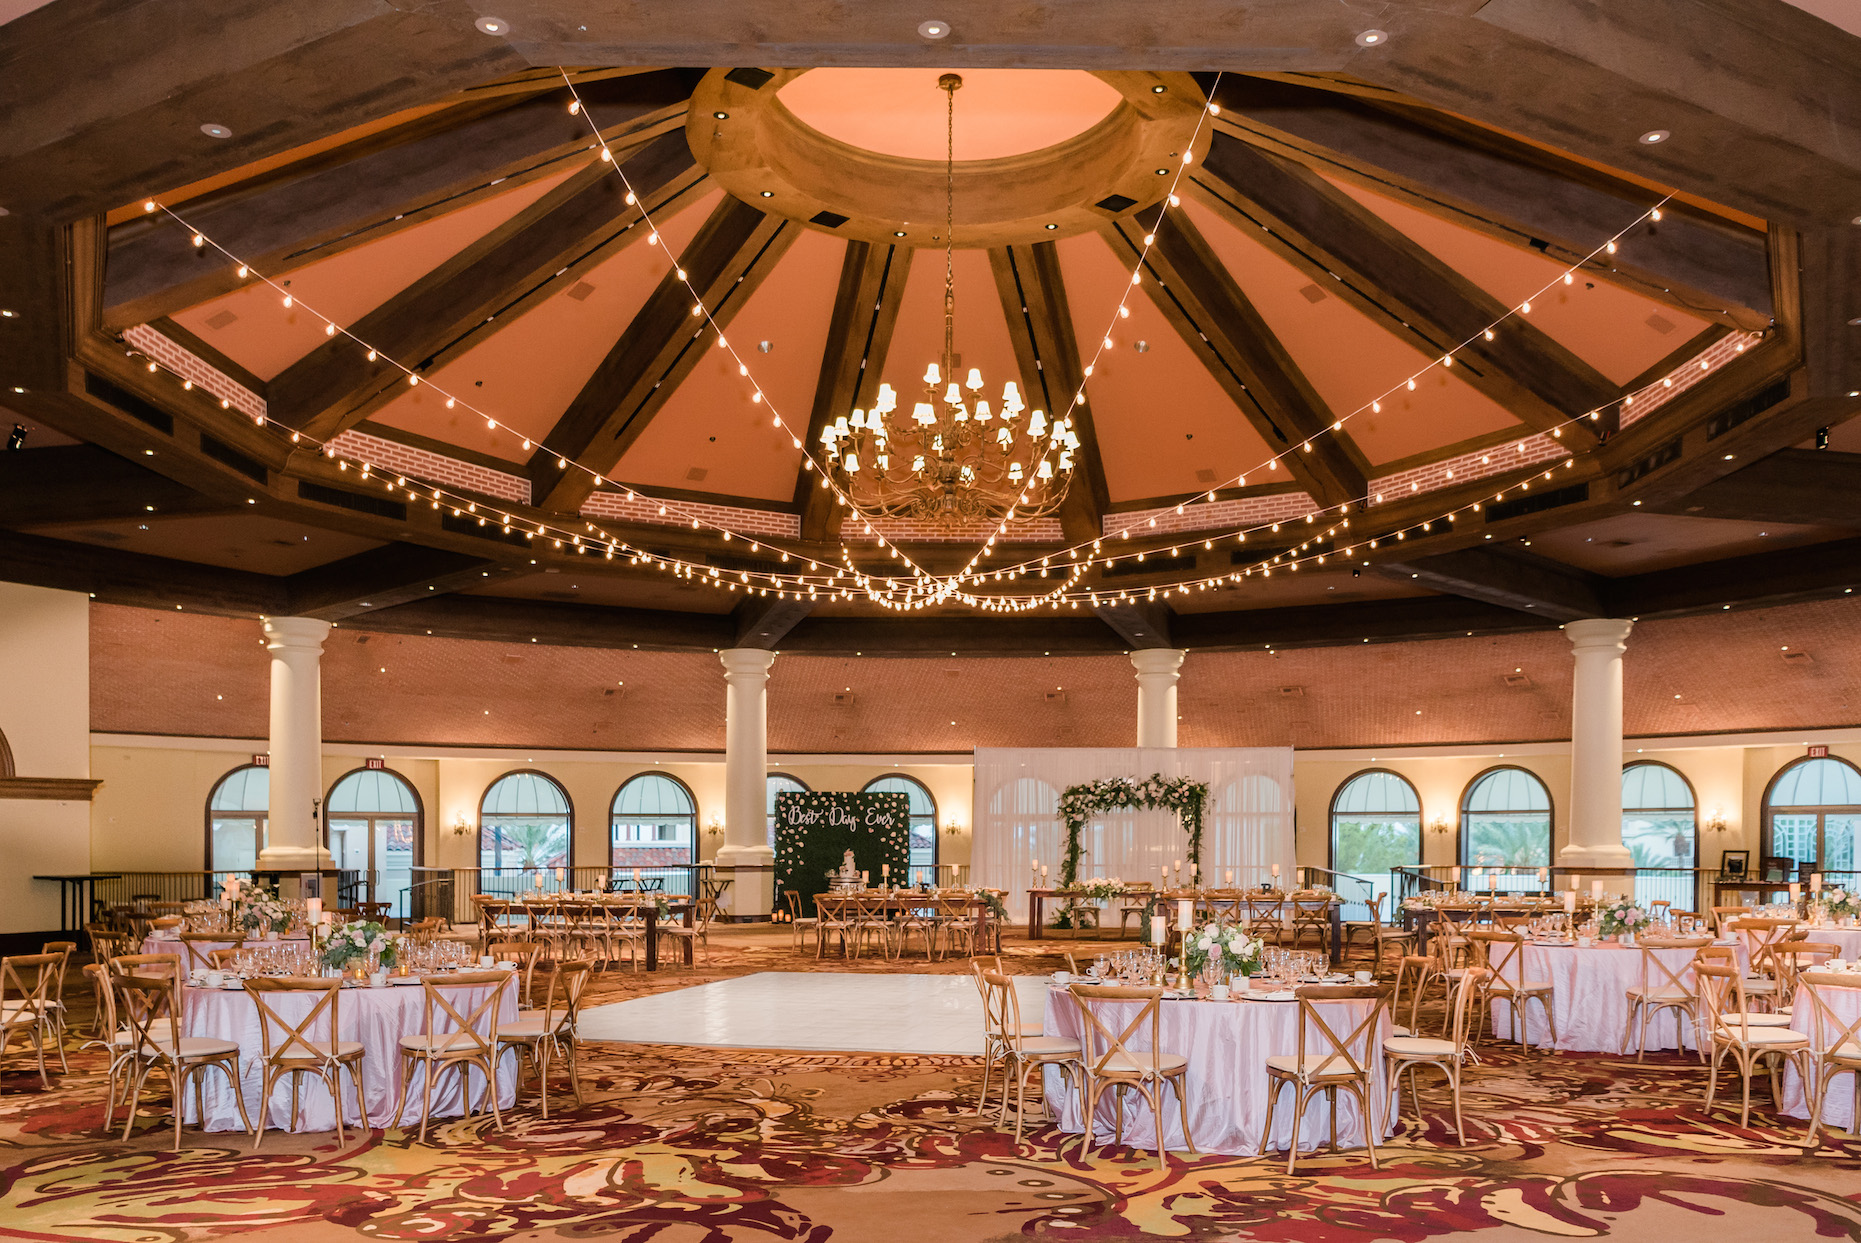 JW Marriott Las Vegas Resort & Spa - Enjoy the mix of new and old world  charm in The Parian Room to create a unique setting for your wedding day!  #JWMarriottLV #WeddingWednesday